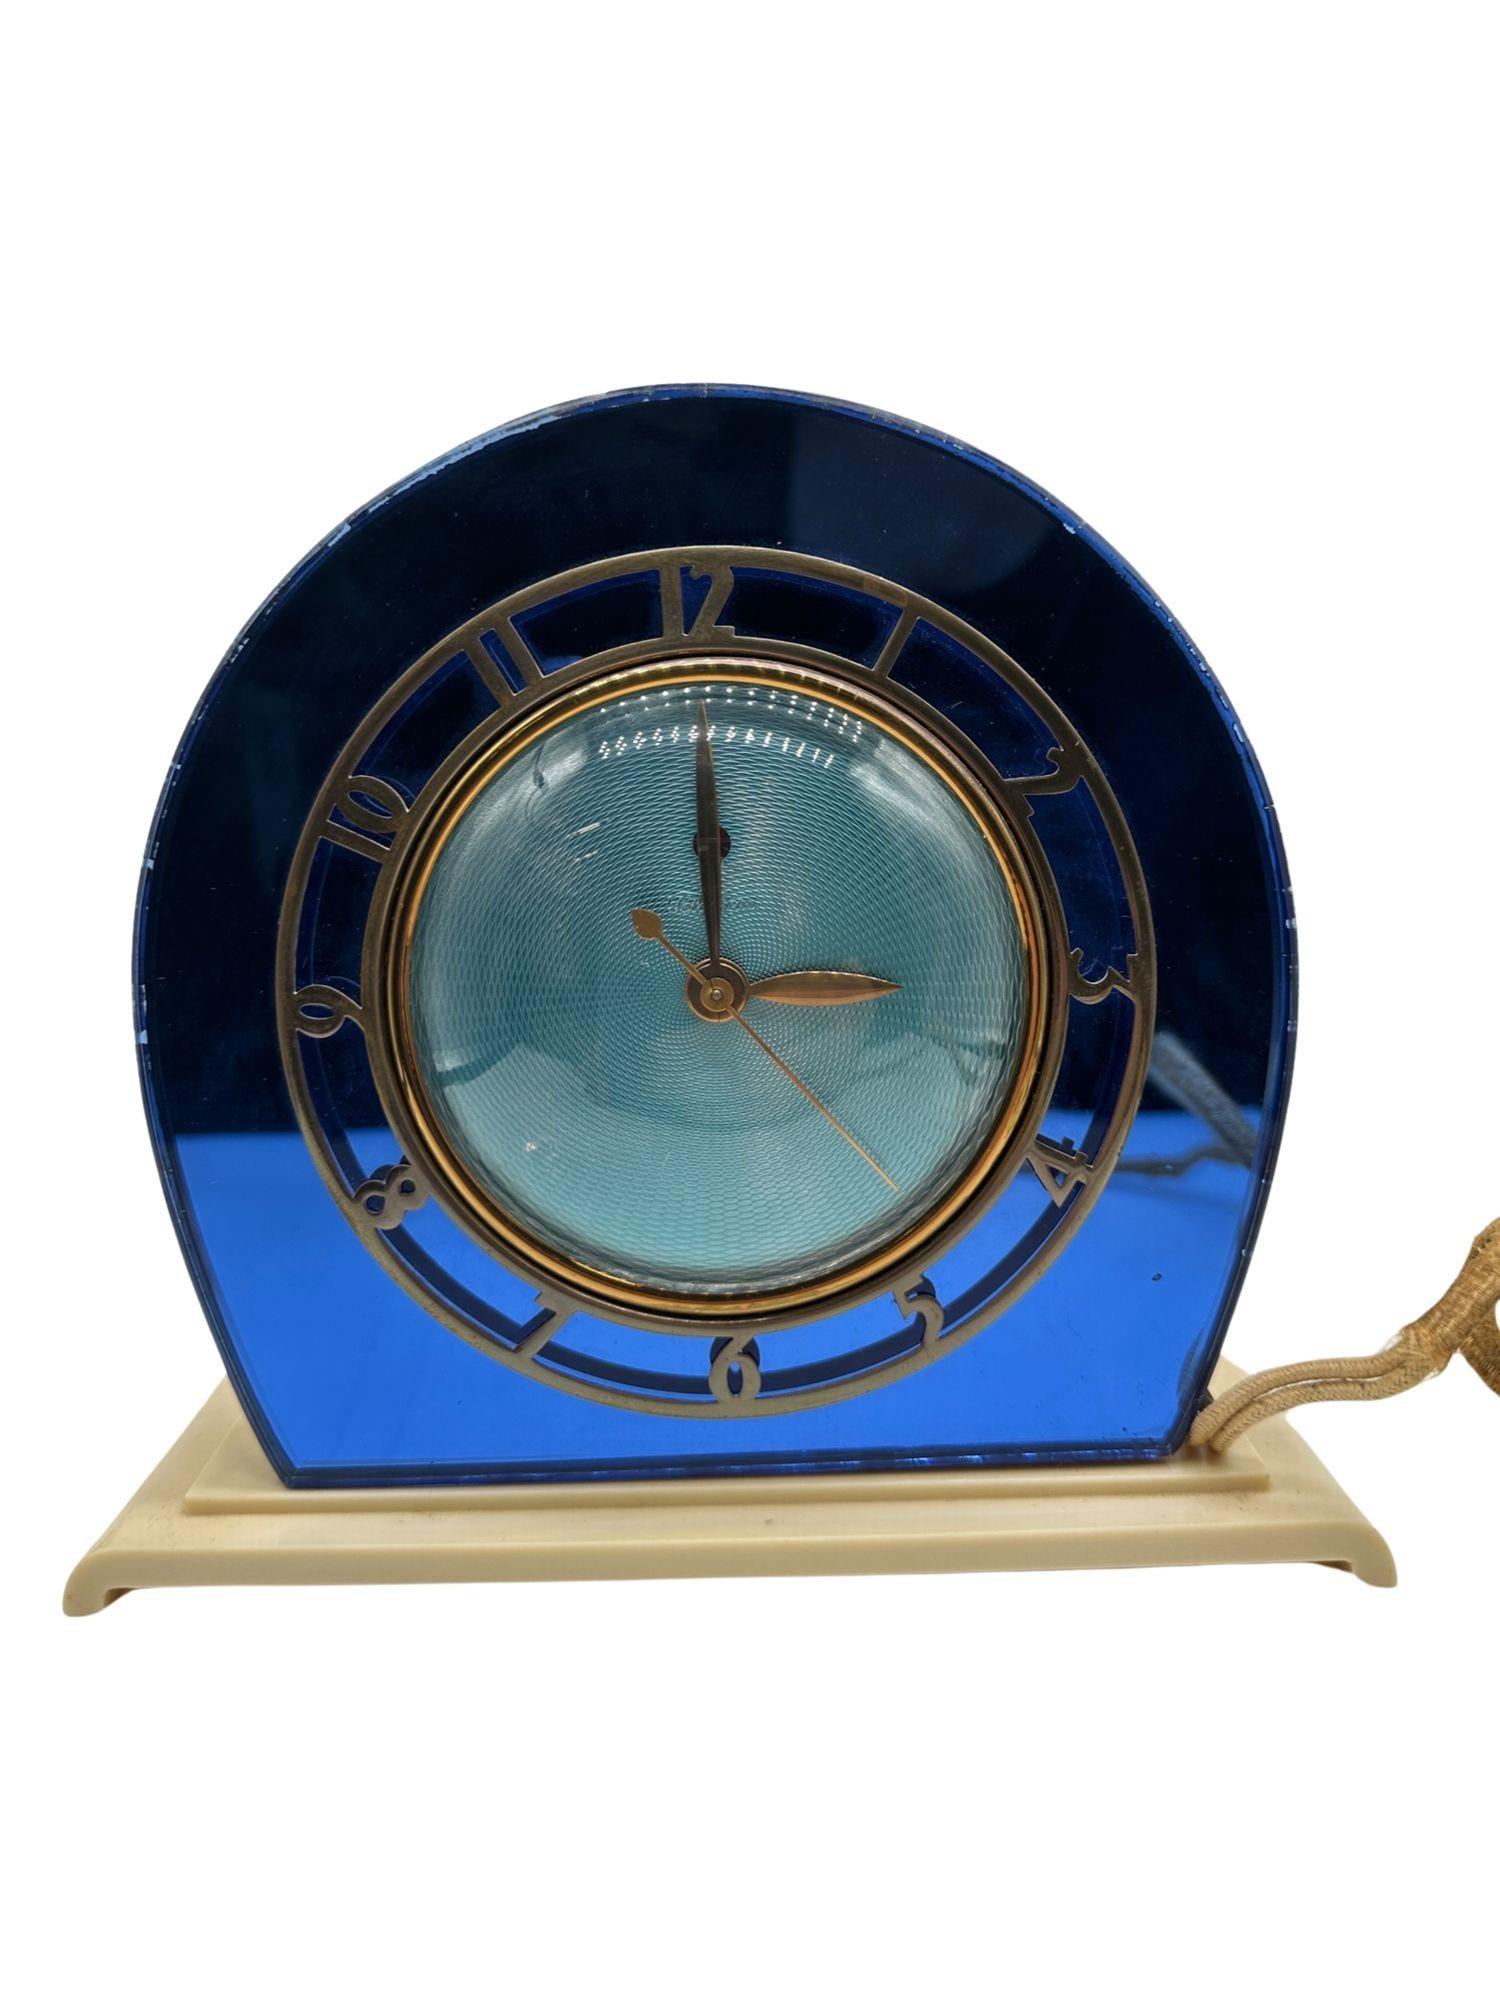 1937 Telechron “Casino” Art Deco Electric Clock with Cobalt Blue Mirror In Excellent Condition For Sale In Van Nuys, CA